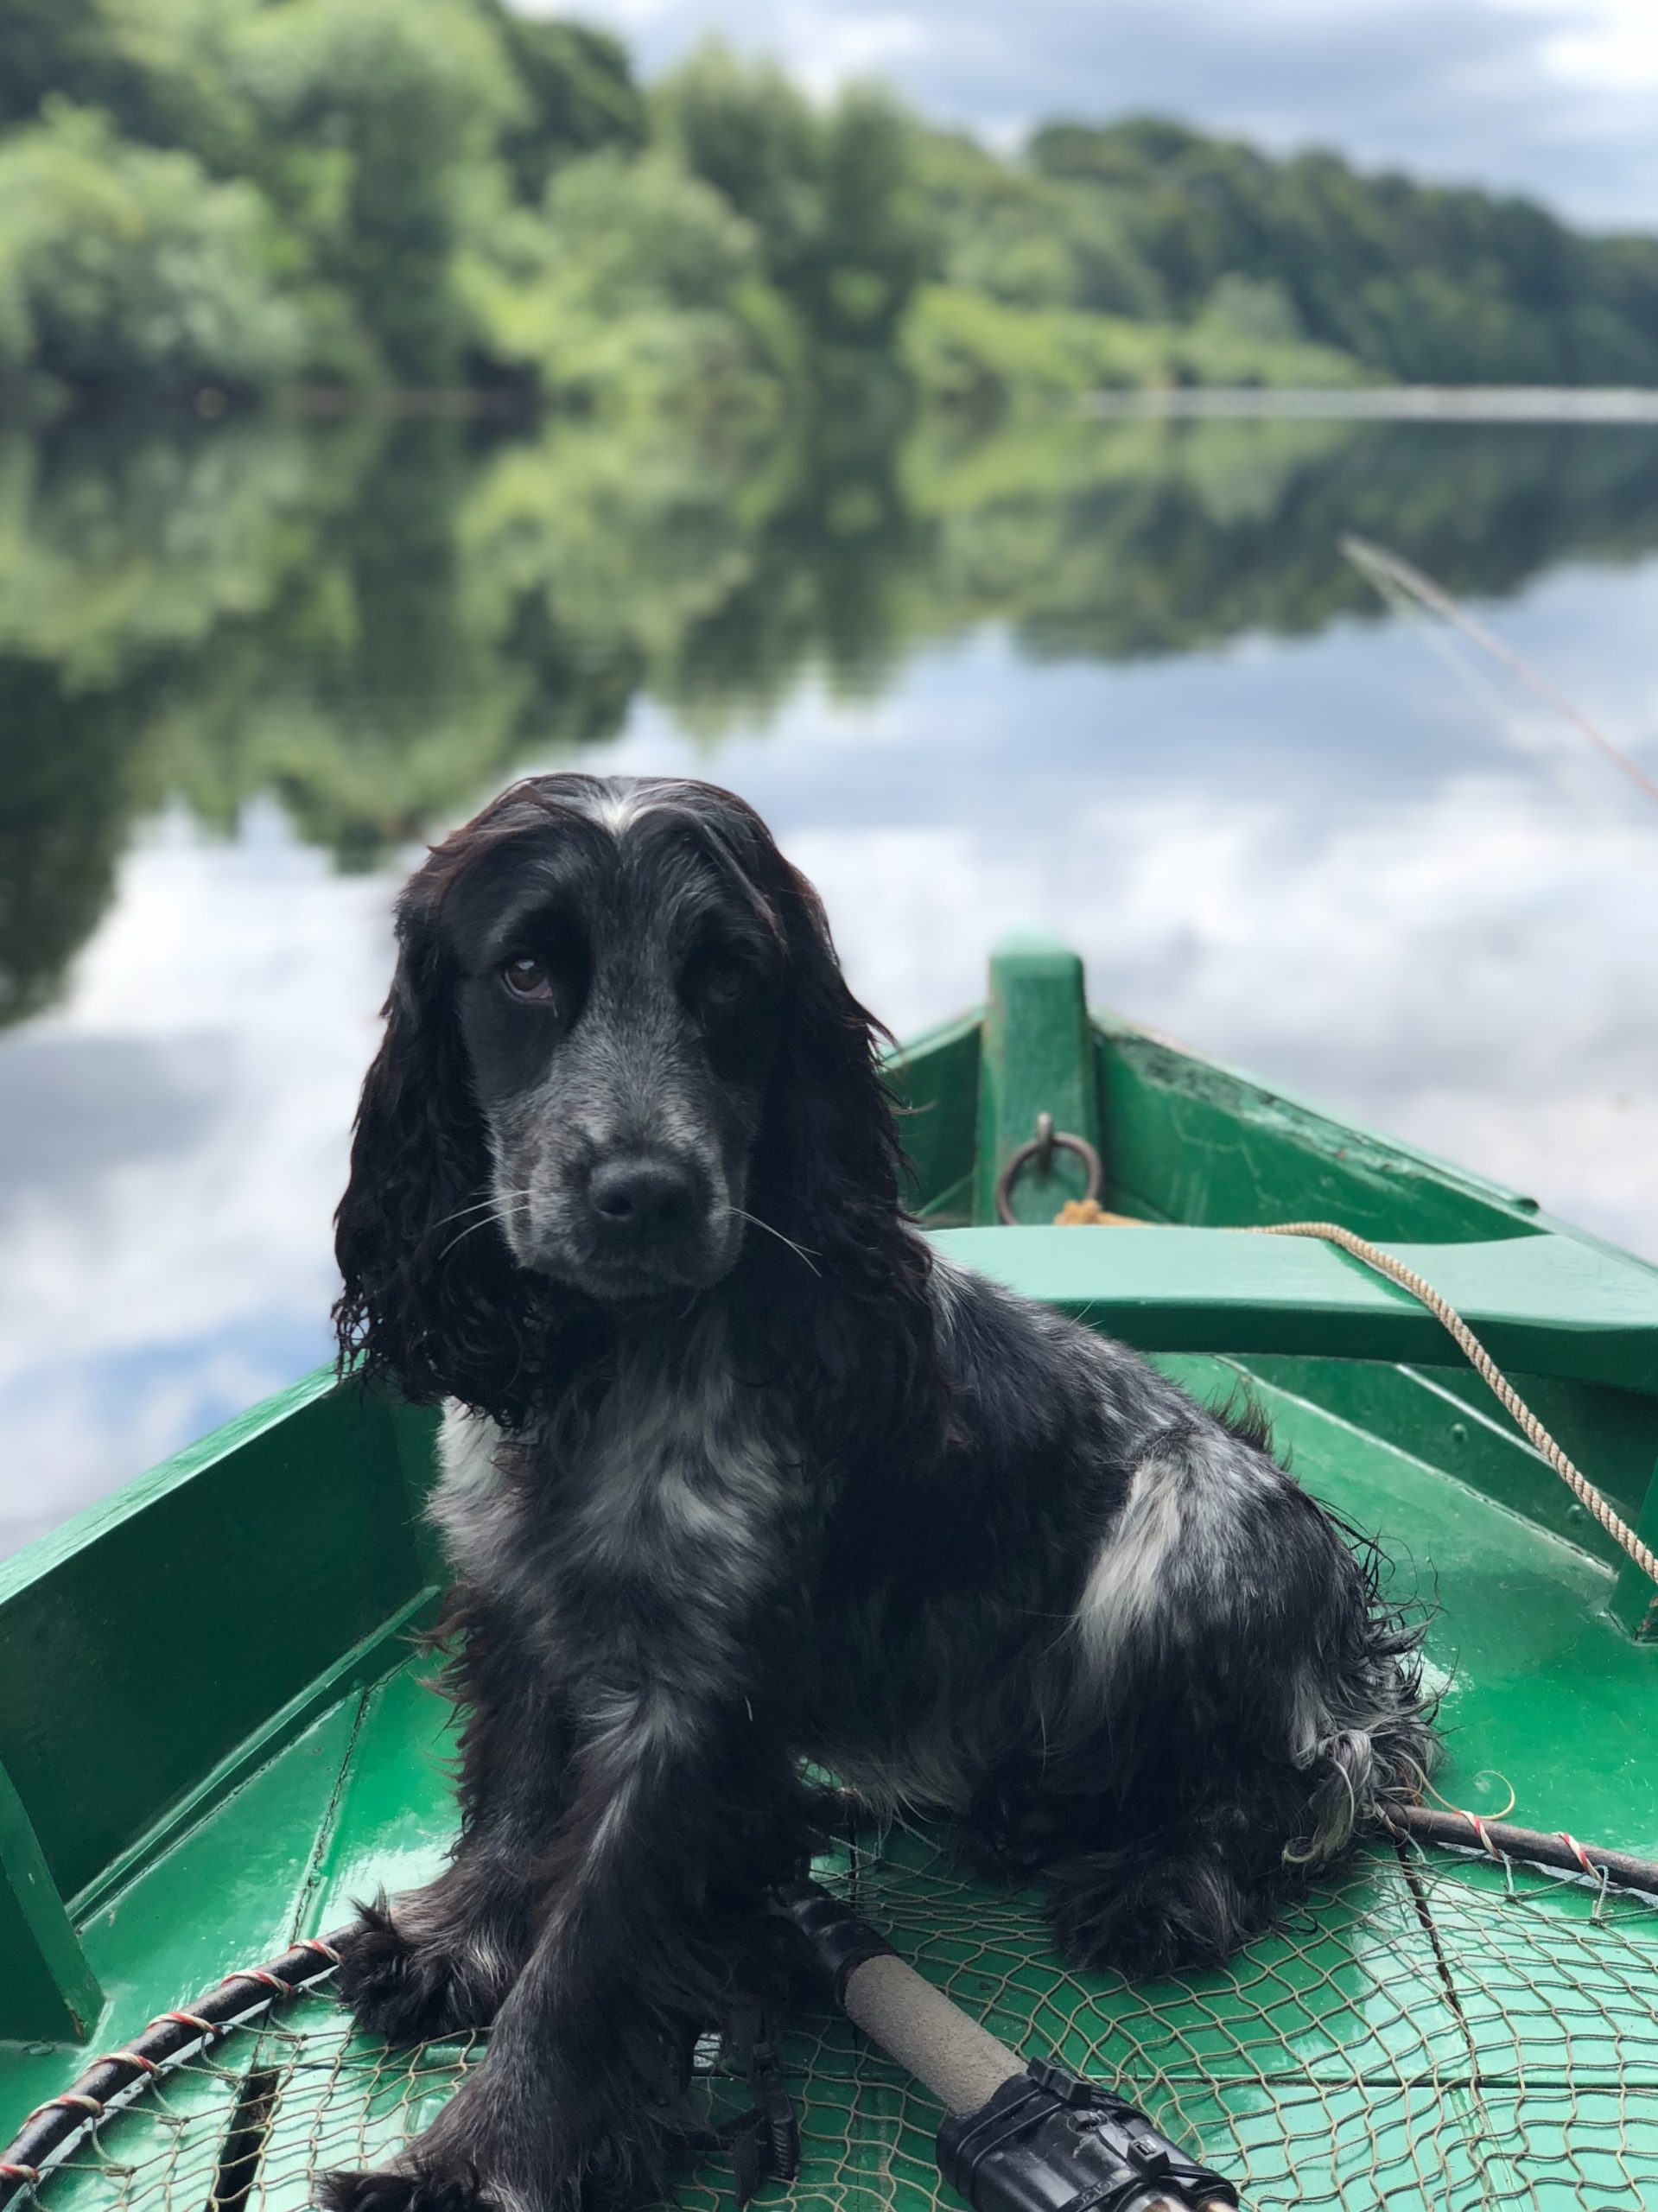 Dog sitting in a green canoe while floating on a lake